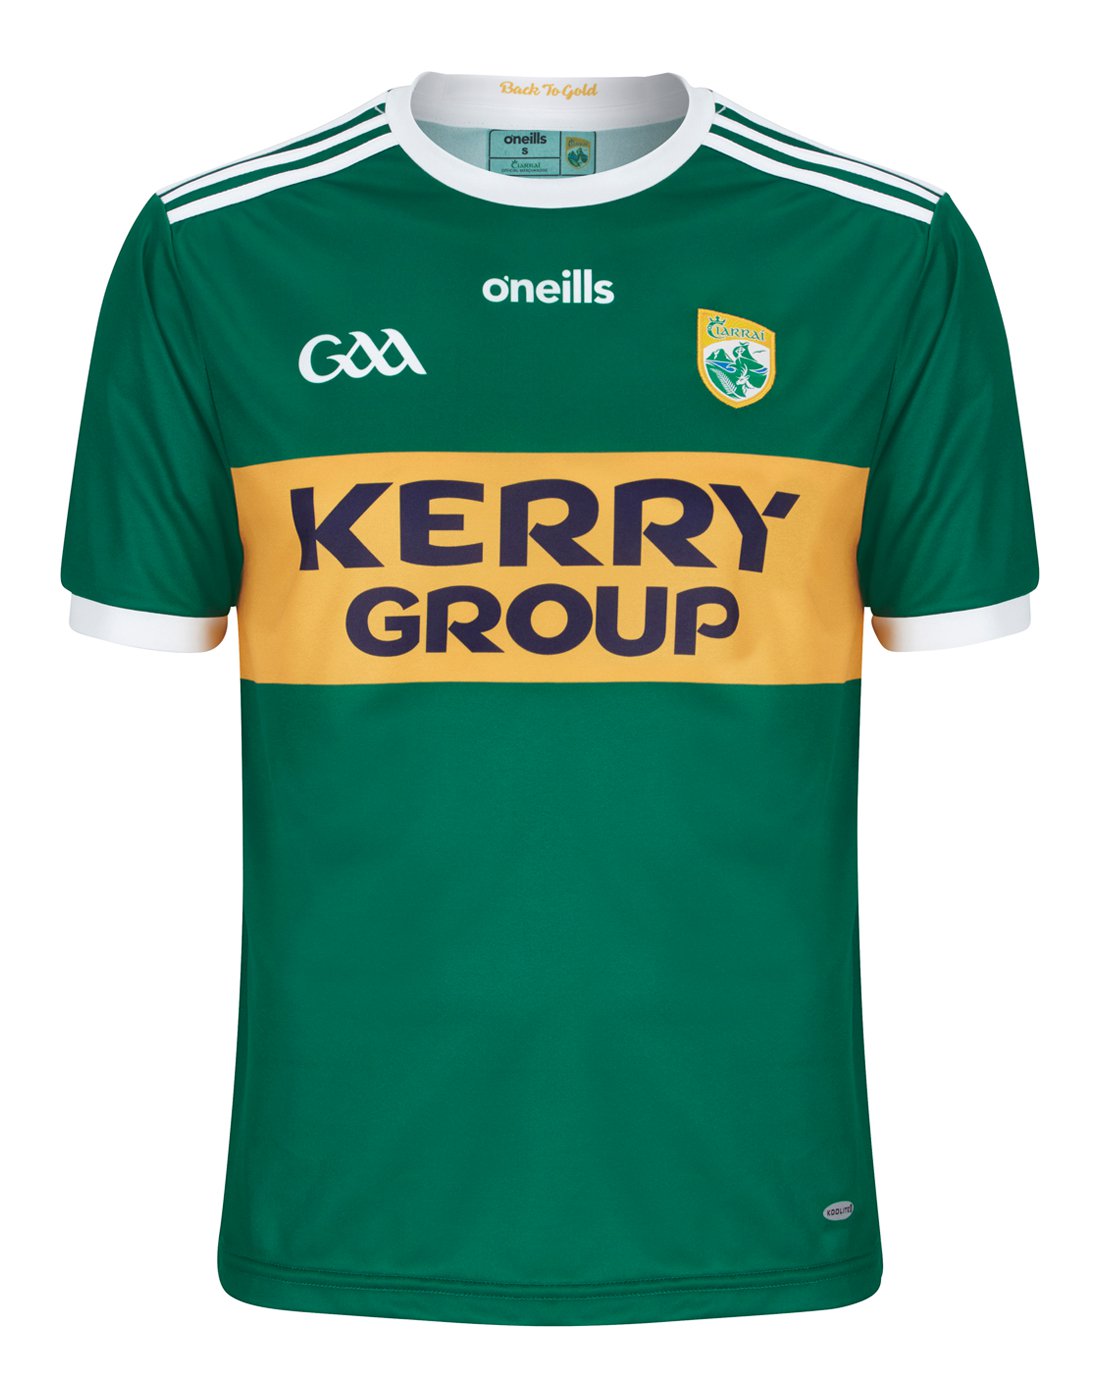 adidas kerry jersey for sale